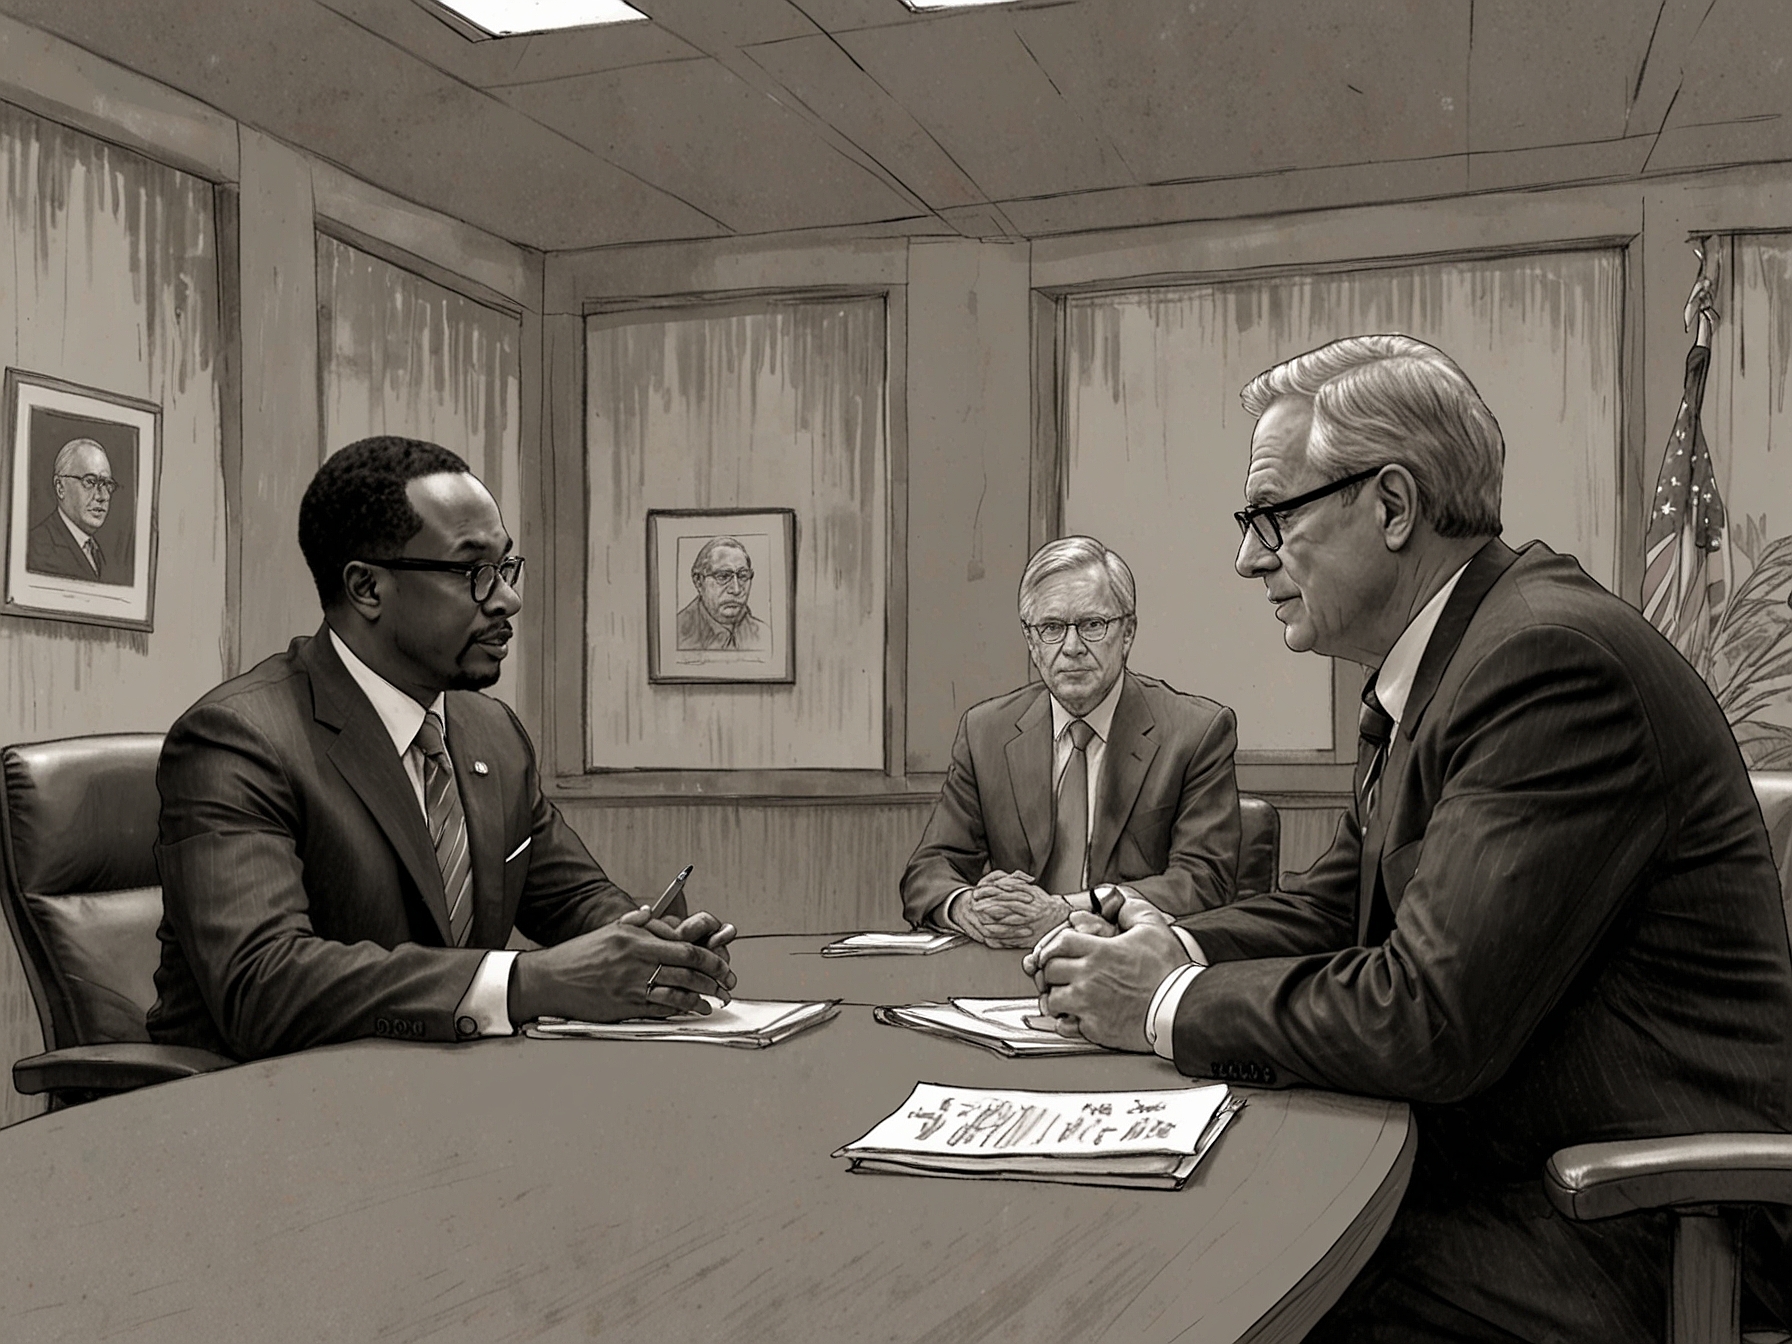 Lloyd Austin and Derek Chollet in a meeting room, symbolizing the integration of seasoned foreign policy experts into high-ranking Defense Department roles for cohesive national security strategies.